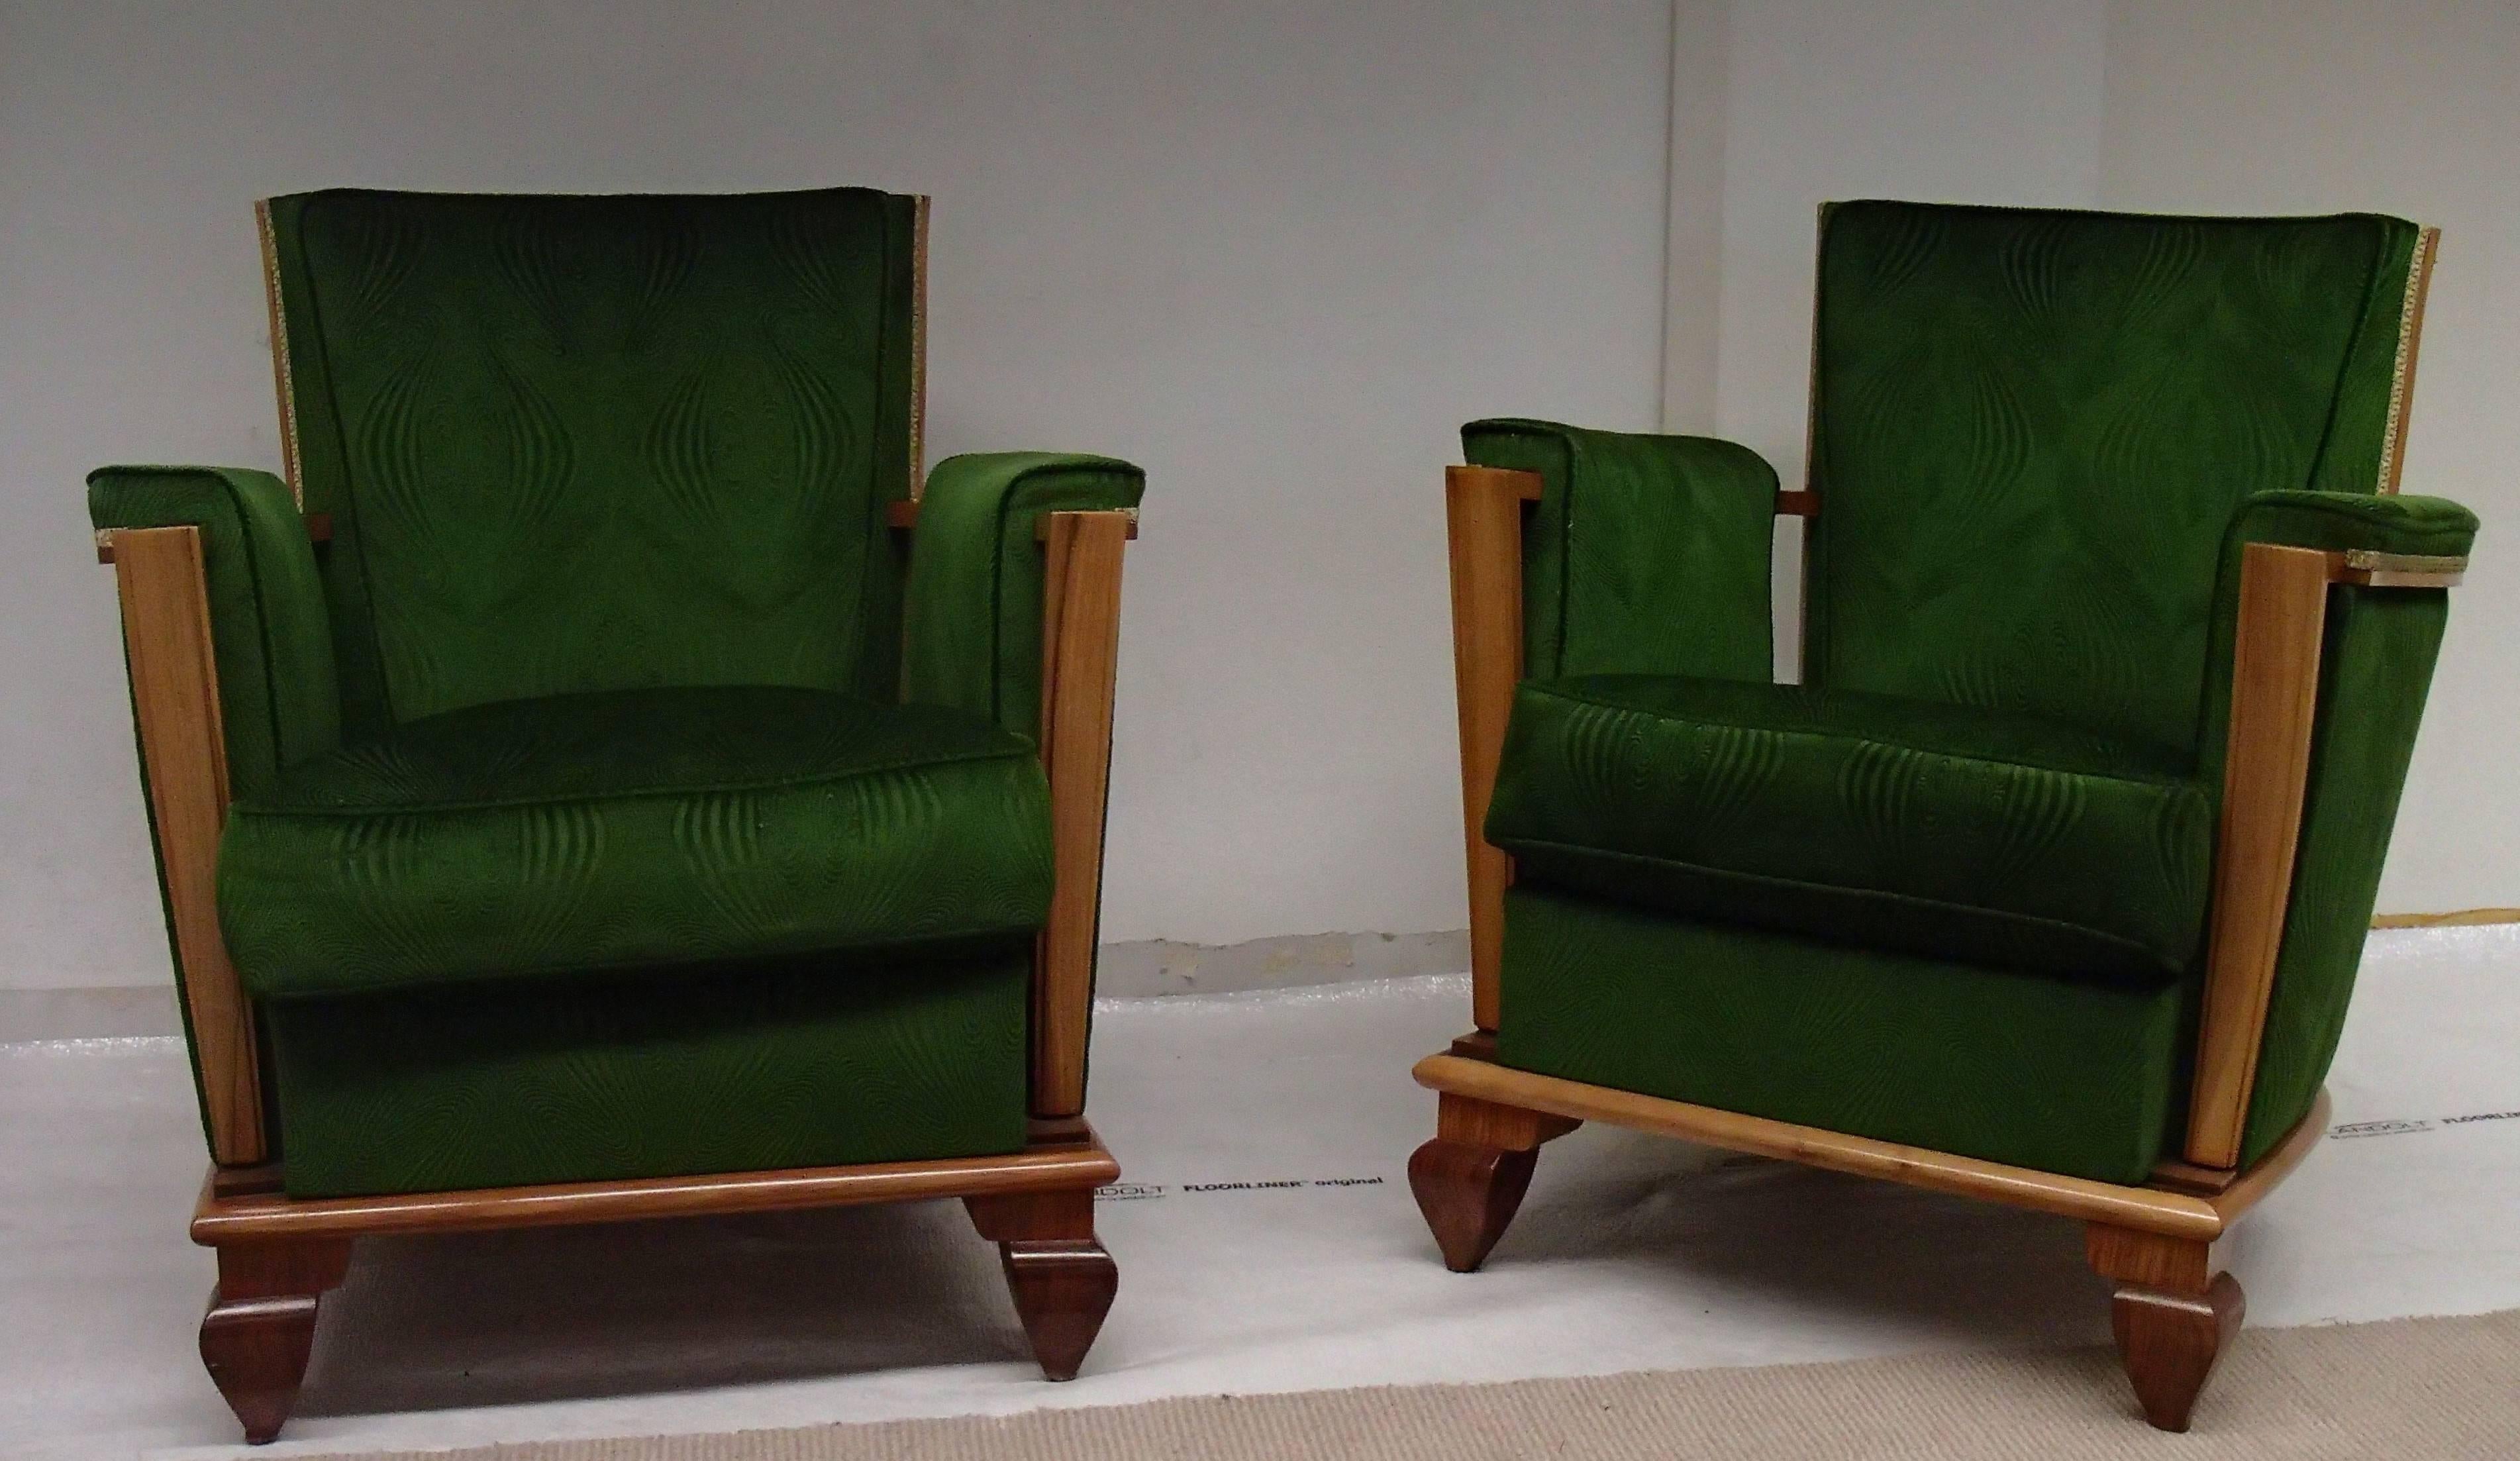 One of a kind seating set completely re-upholstered and restored. Cushions filled with goose feather's. 17 meter's of green relief velour was used to cover. 
The sofa is 195 cm long and 70 cm deep. The armchairs are 75 cm large and 70 cm deep.